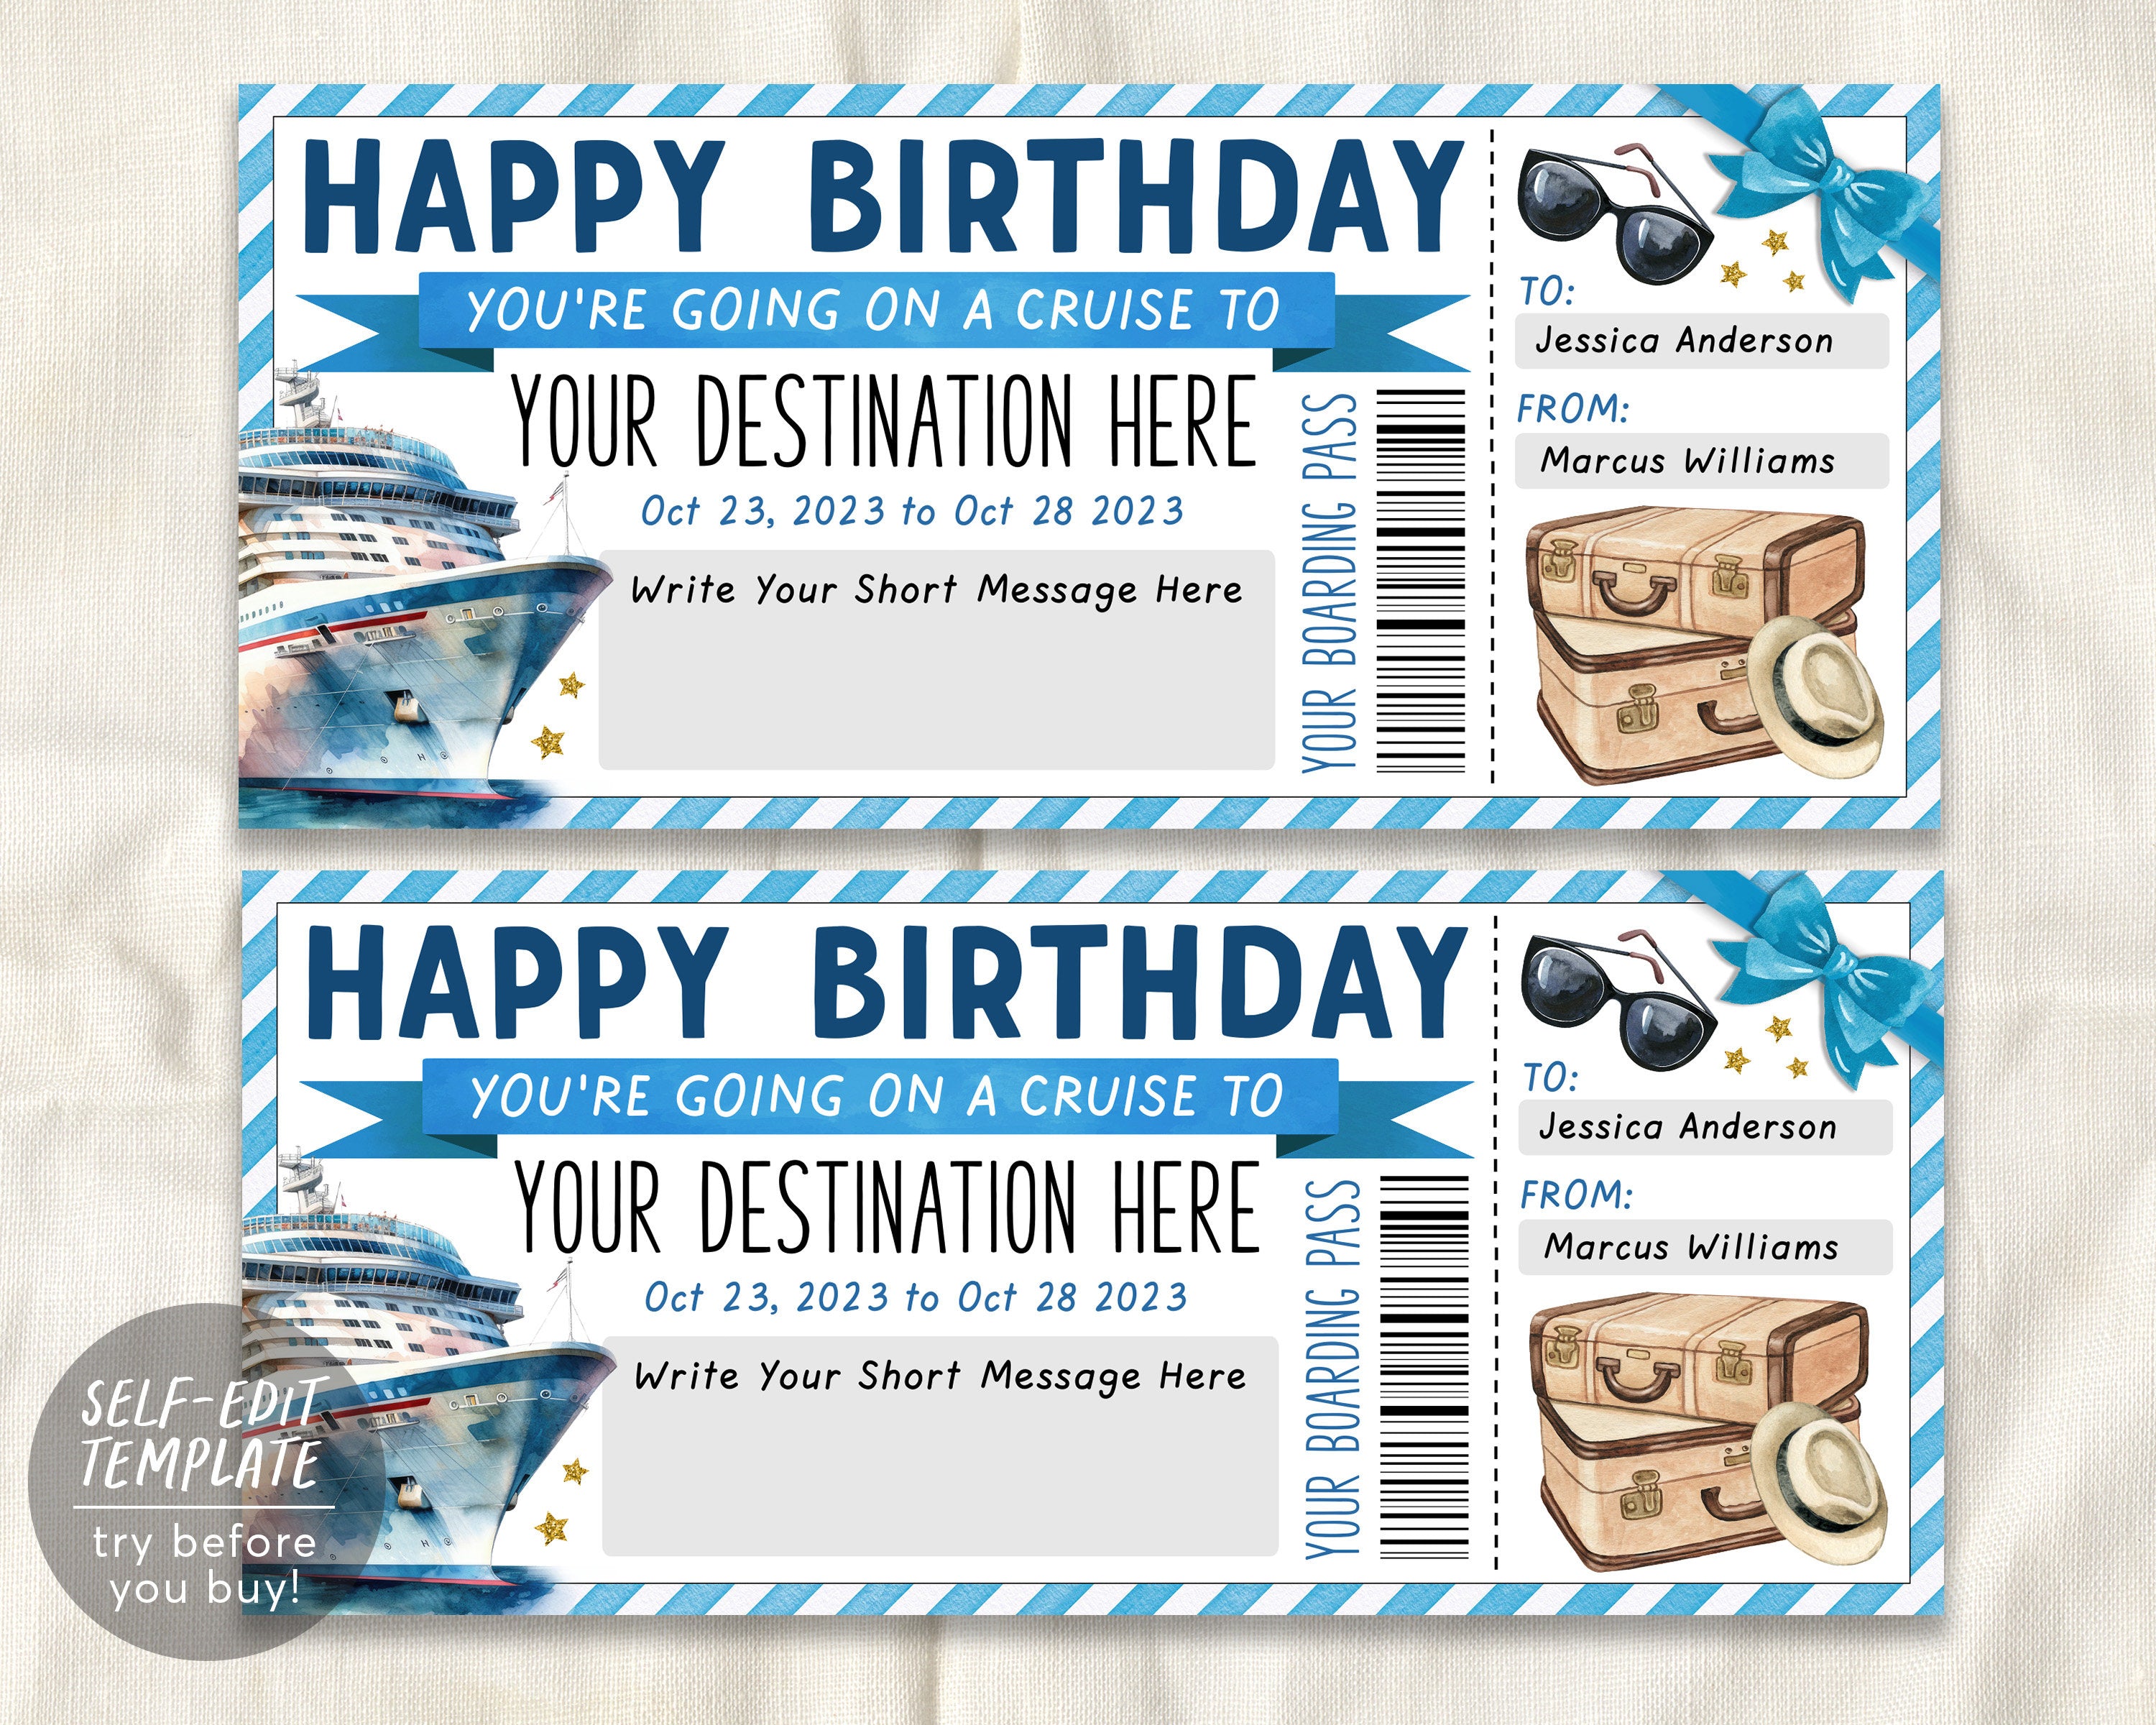 Travel Voucher Gift Certificate Template FREE 2 | Gift certificate  template, Certificate templates, Travel gifts